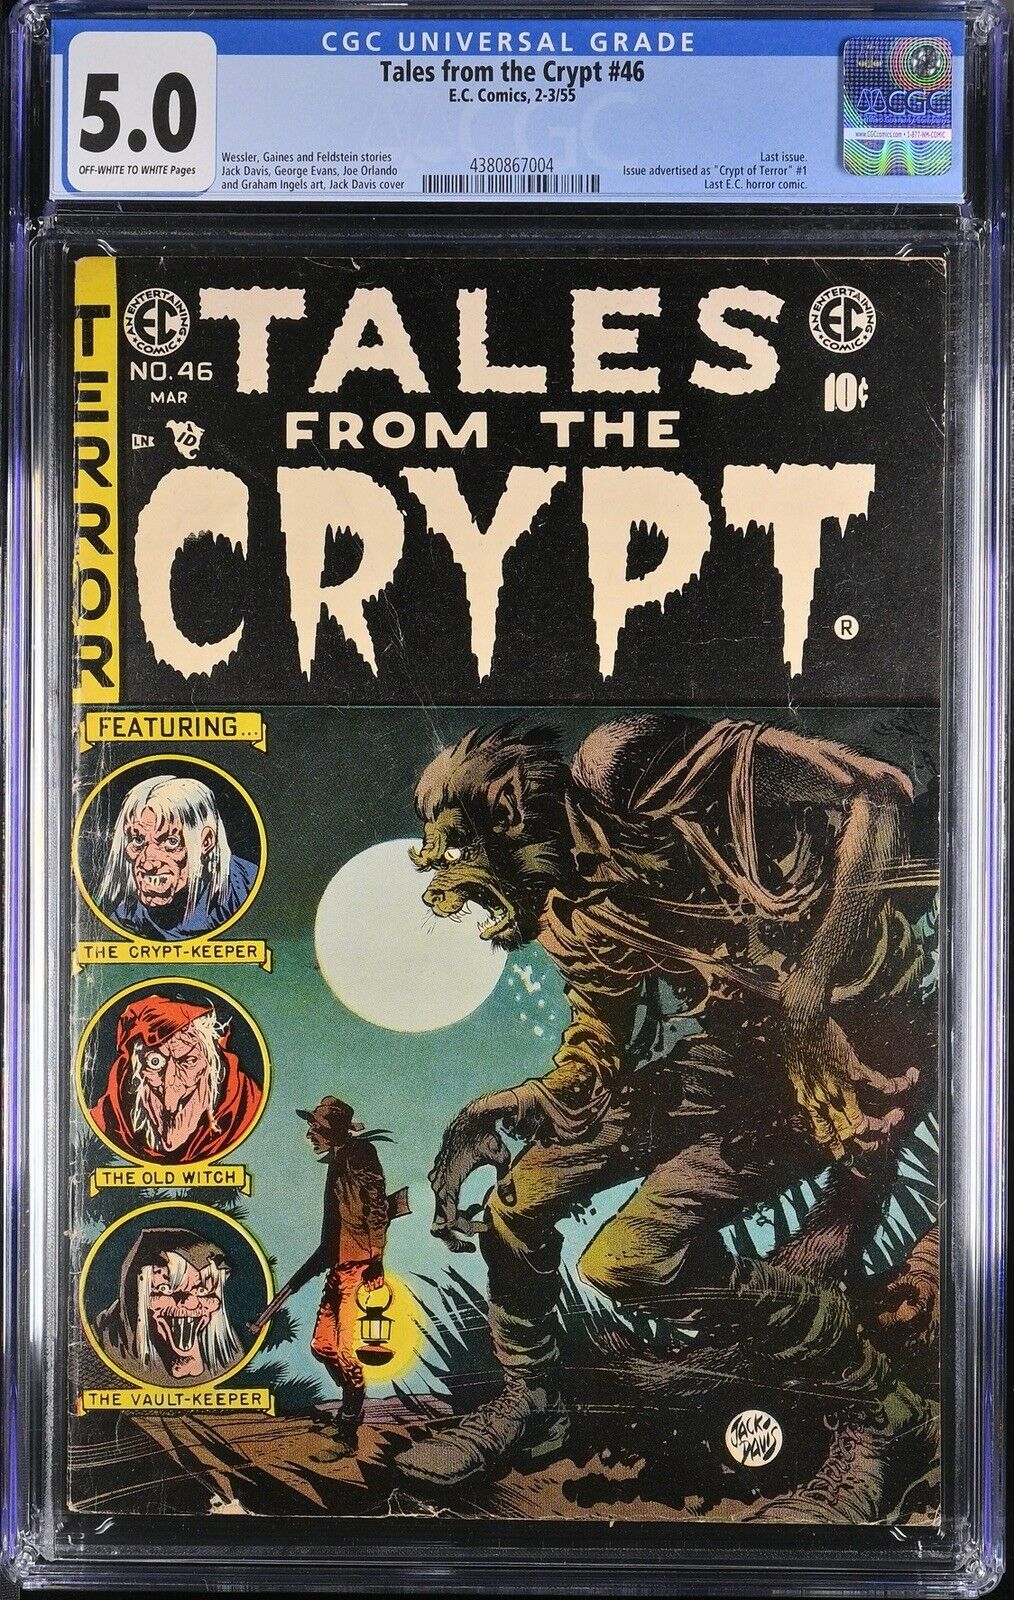 TALES FROM THE CRYPT #46 CGC VG/FN 5.0 LAST ISSUE LOW DISTRIBUTION EC COMIC 1955